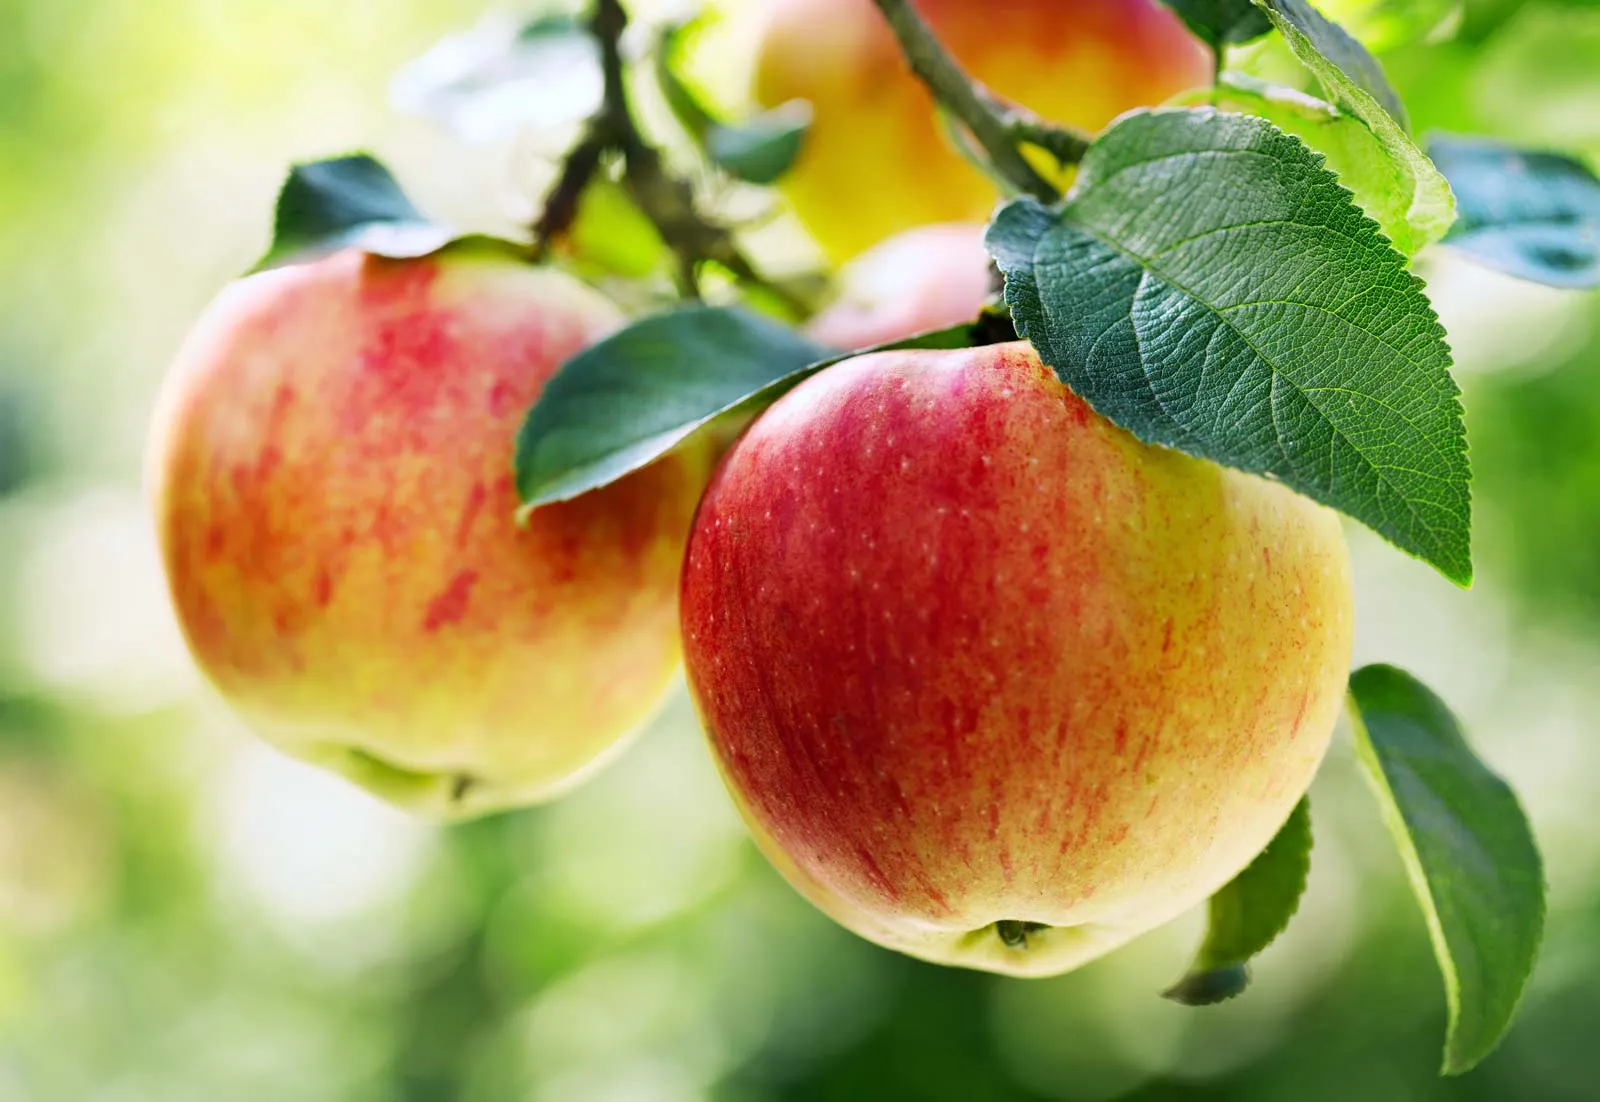 Introduction to Growing and Irrigating Apple Crops